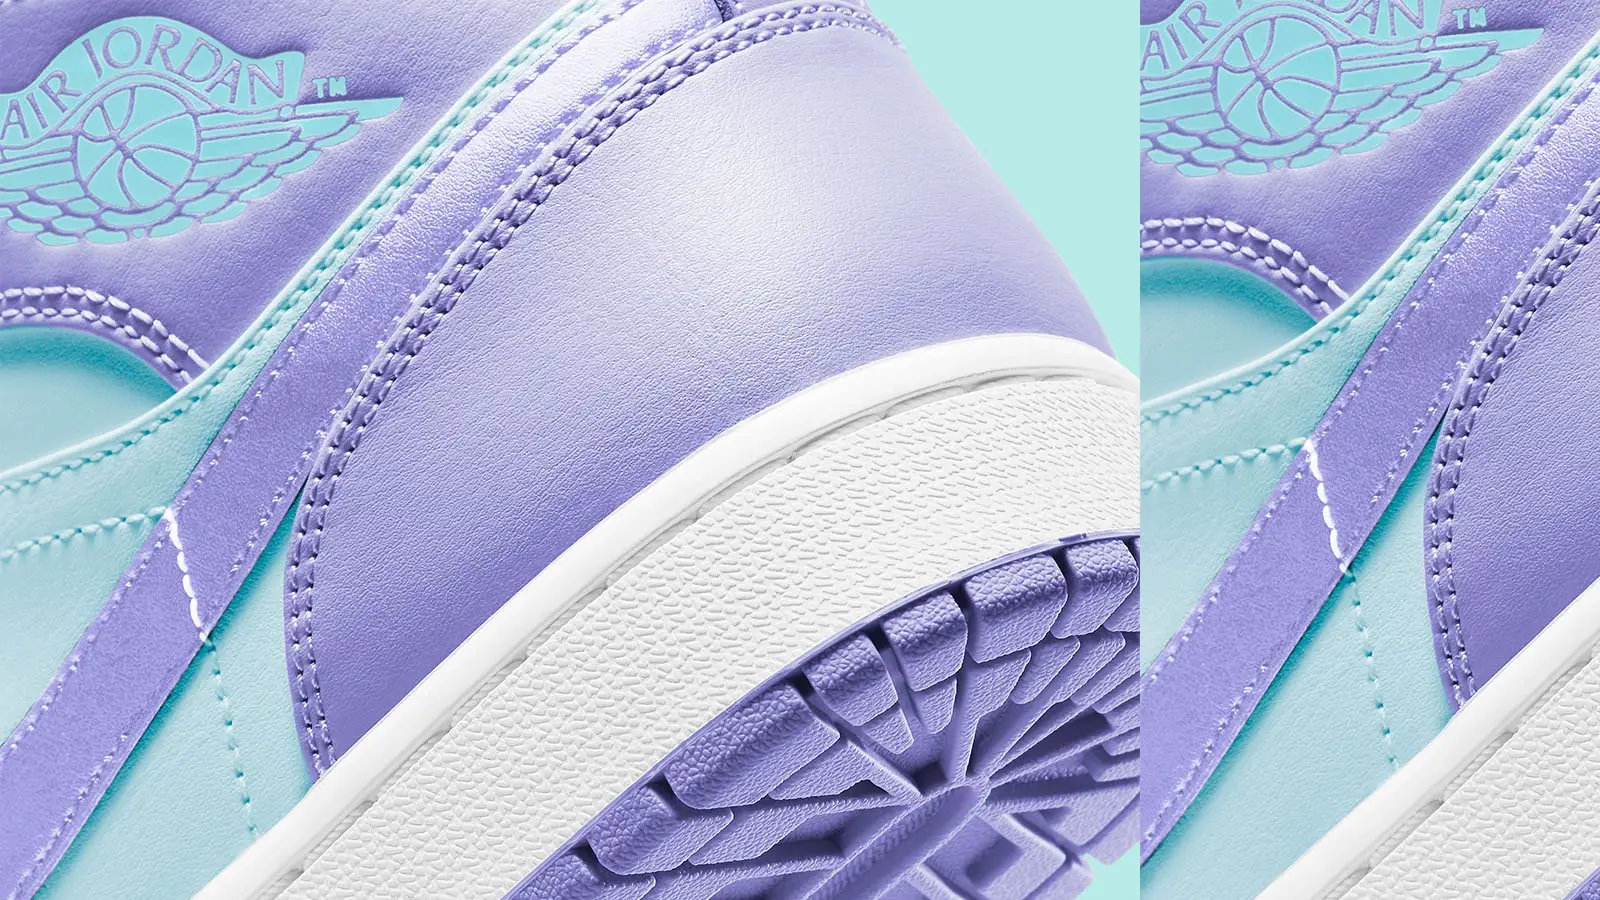 Hits Of Purple And Mint Take Over This Upcoming Nike Air Jordan 1 | The ...